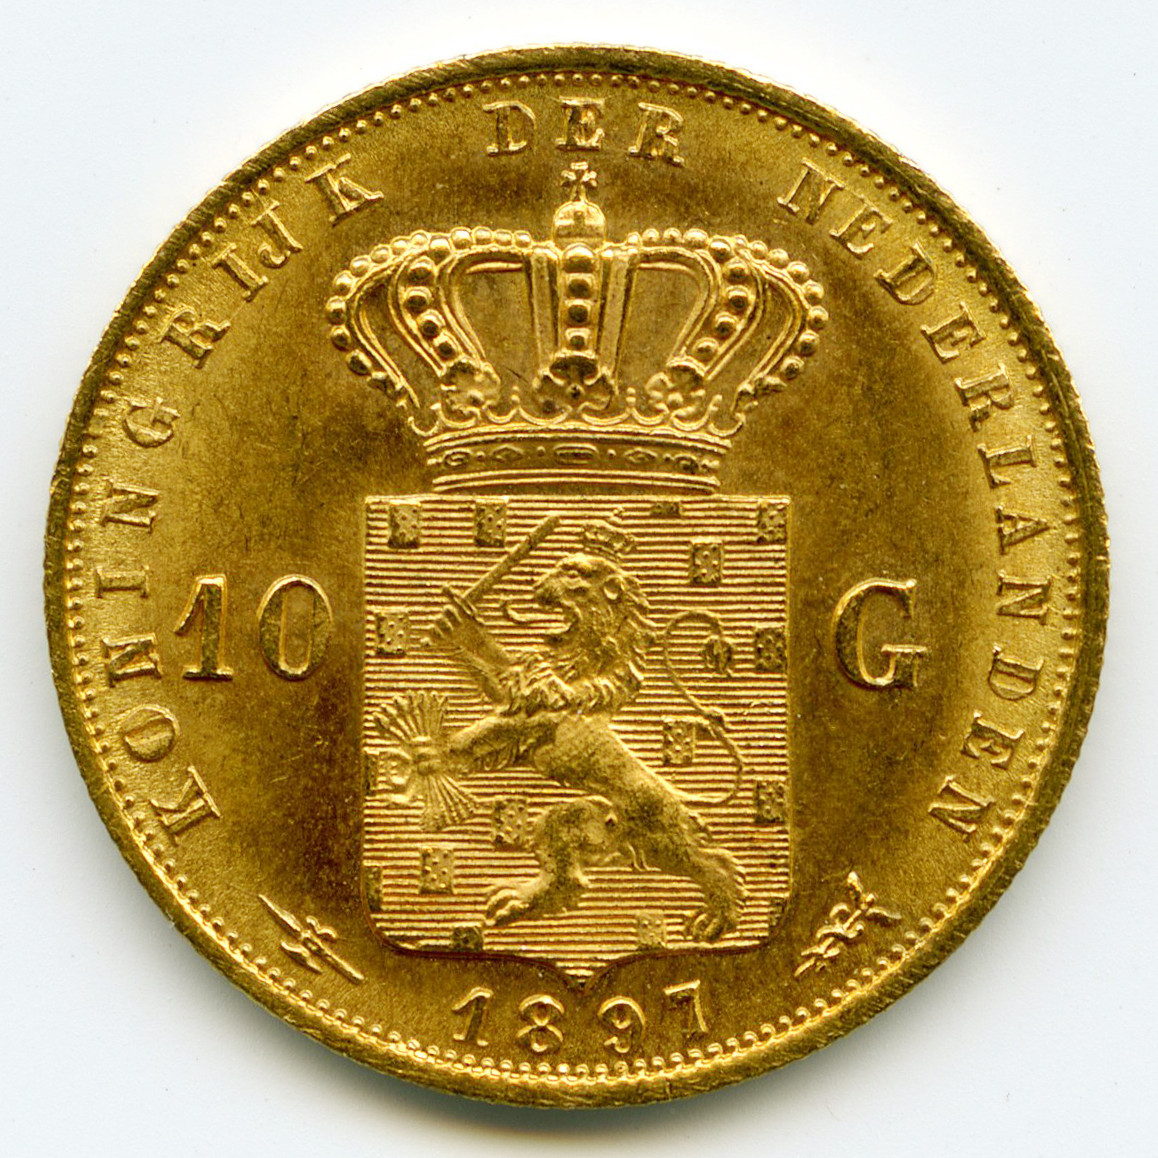 Pays-Bas - 10 Gulden - 1897 revers